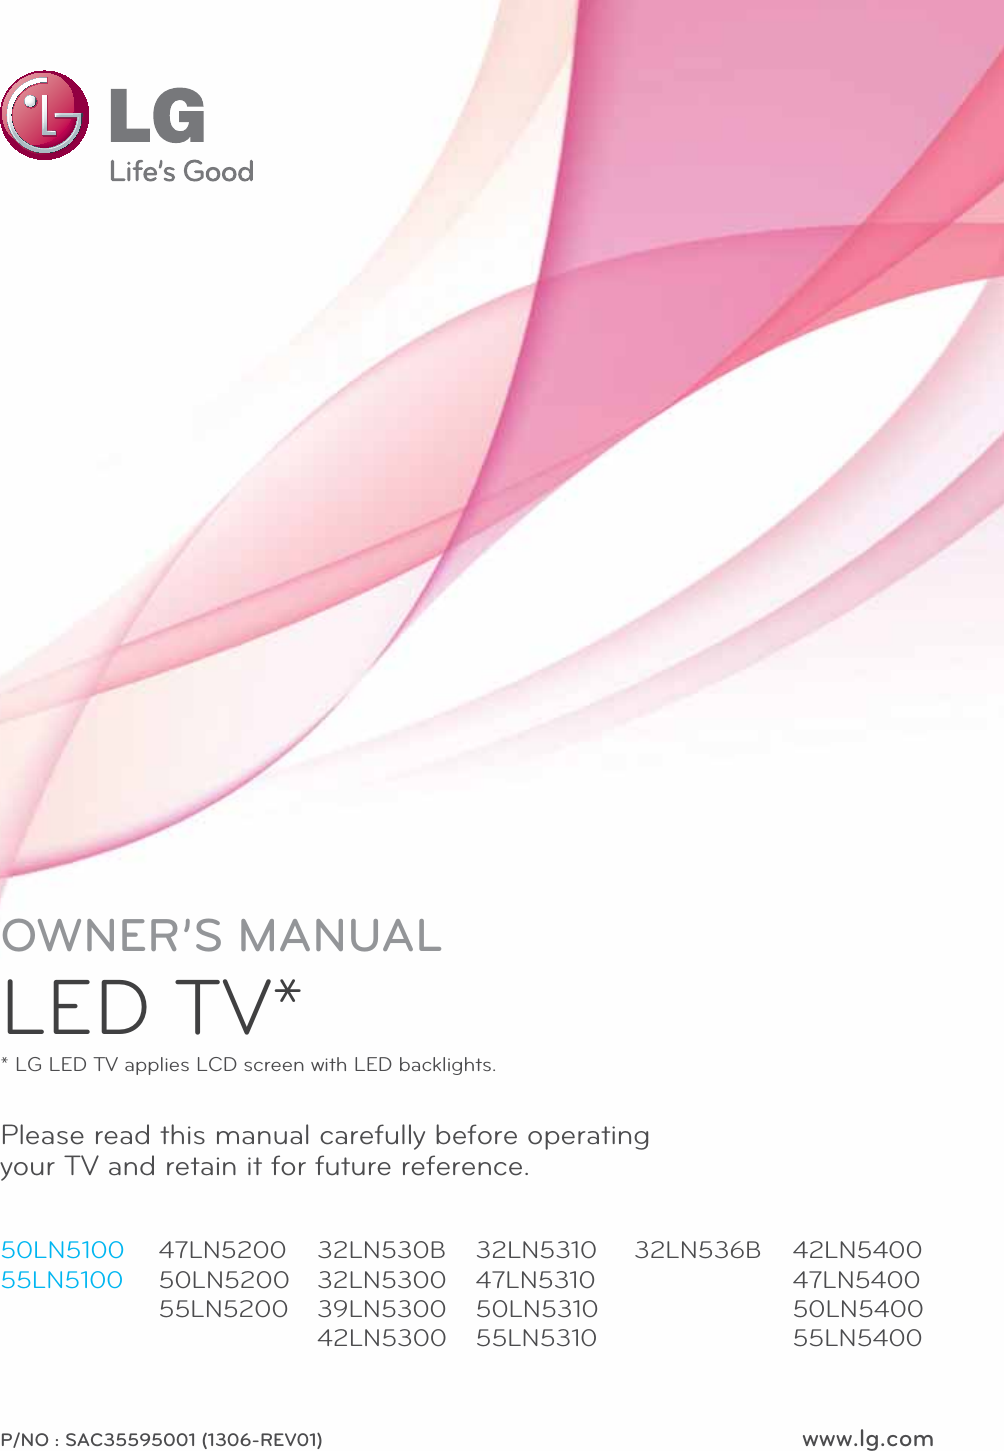 www.lg.comP/NO : SAC35595001 (1306-REV01)Please read this manual carefully before operating your TV and retain it for future reference.OWNER’S MANUALLED TV** LG LED TV applies LCD screen with LED backlights.50LN5100 55LN510047LN5200 50LN5200 55LN520032LN530B 32LN5300 39LN5300 42LN530032LN5310 47LN5310 50LN5310 55LN531032LN536B 42LN5400 47LN5400 50LN5400 55LN5400